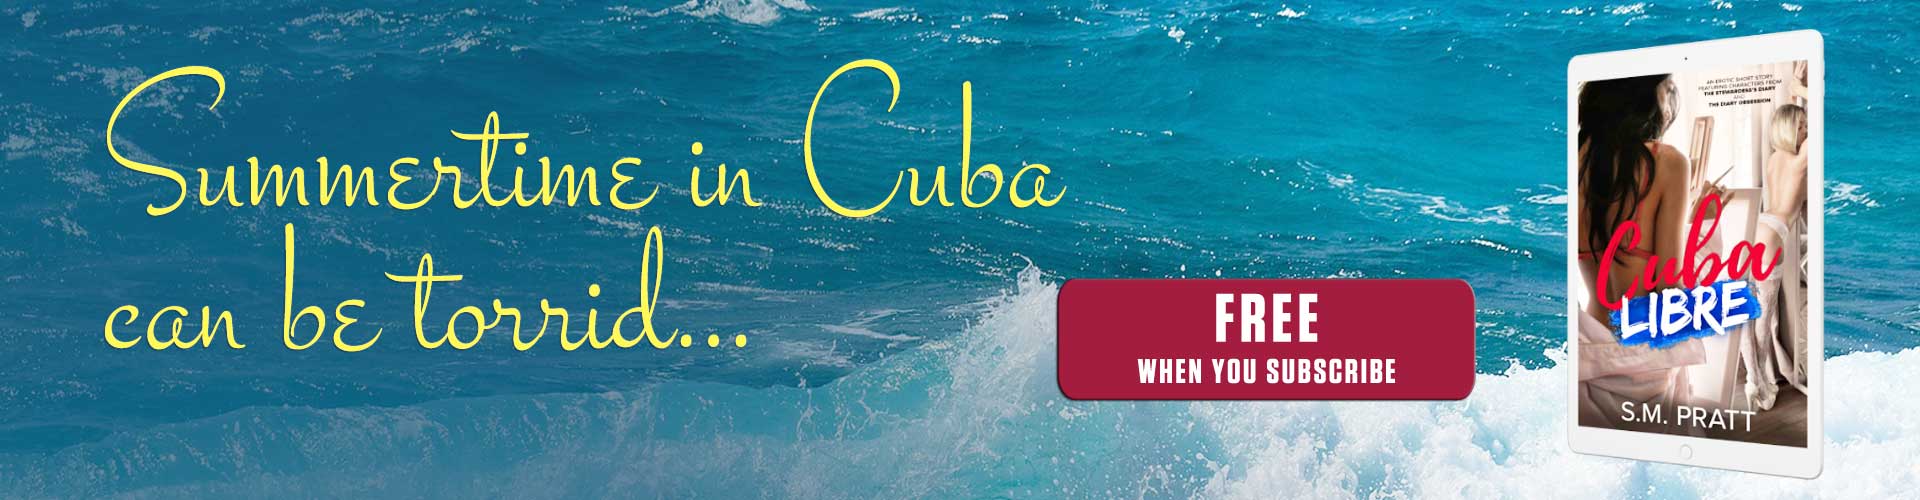 Summertime in Cuba can be torrid... FREE when you subscribe